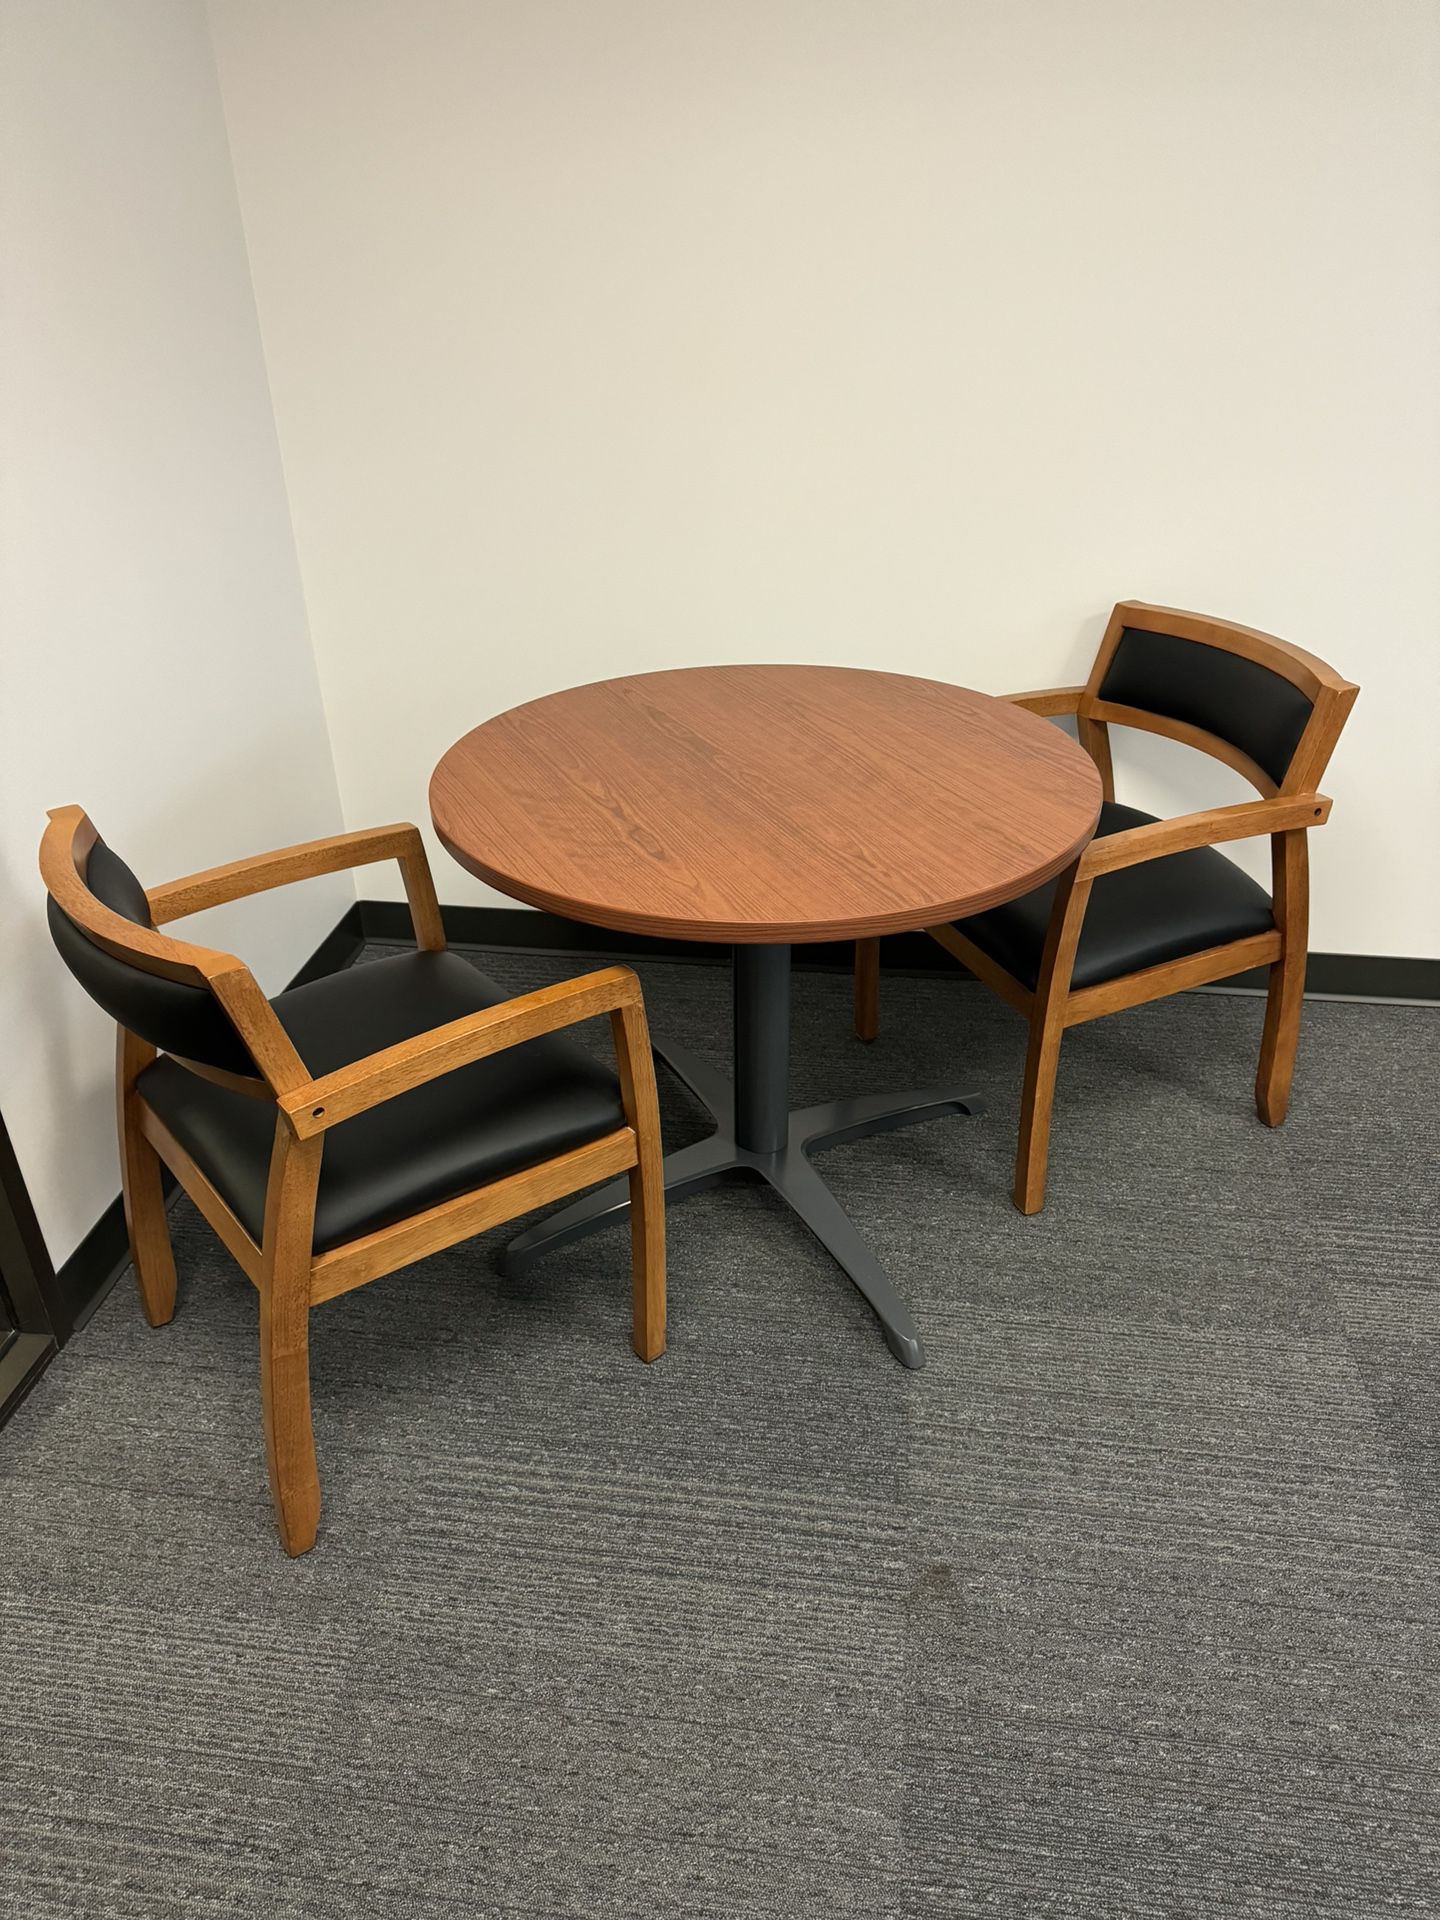 Small Office Table W / 2 Chairs